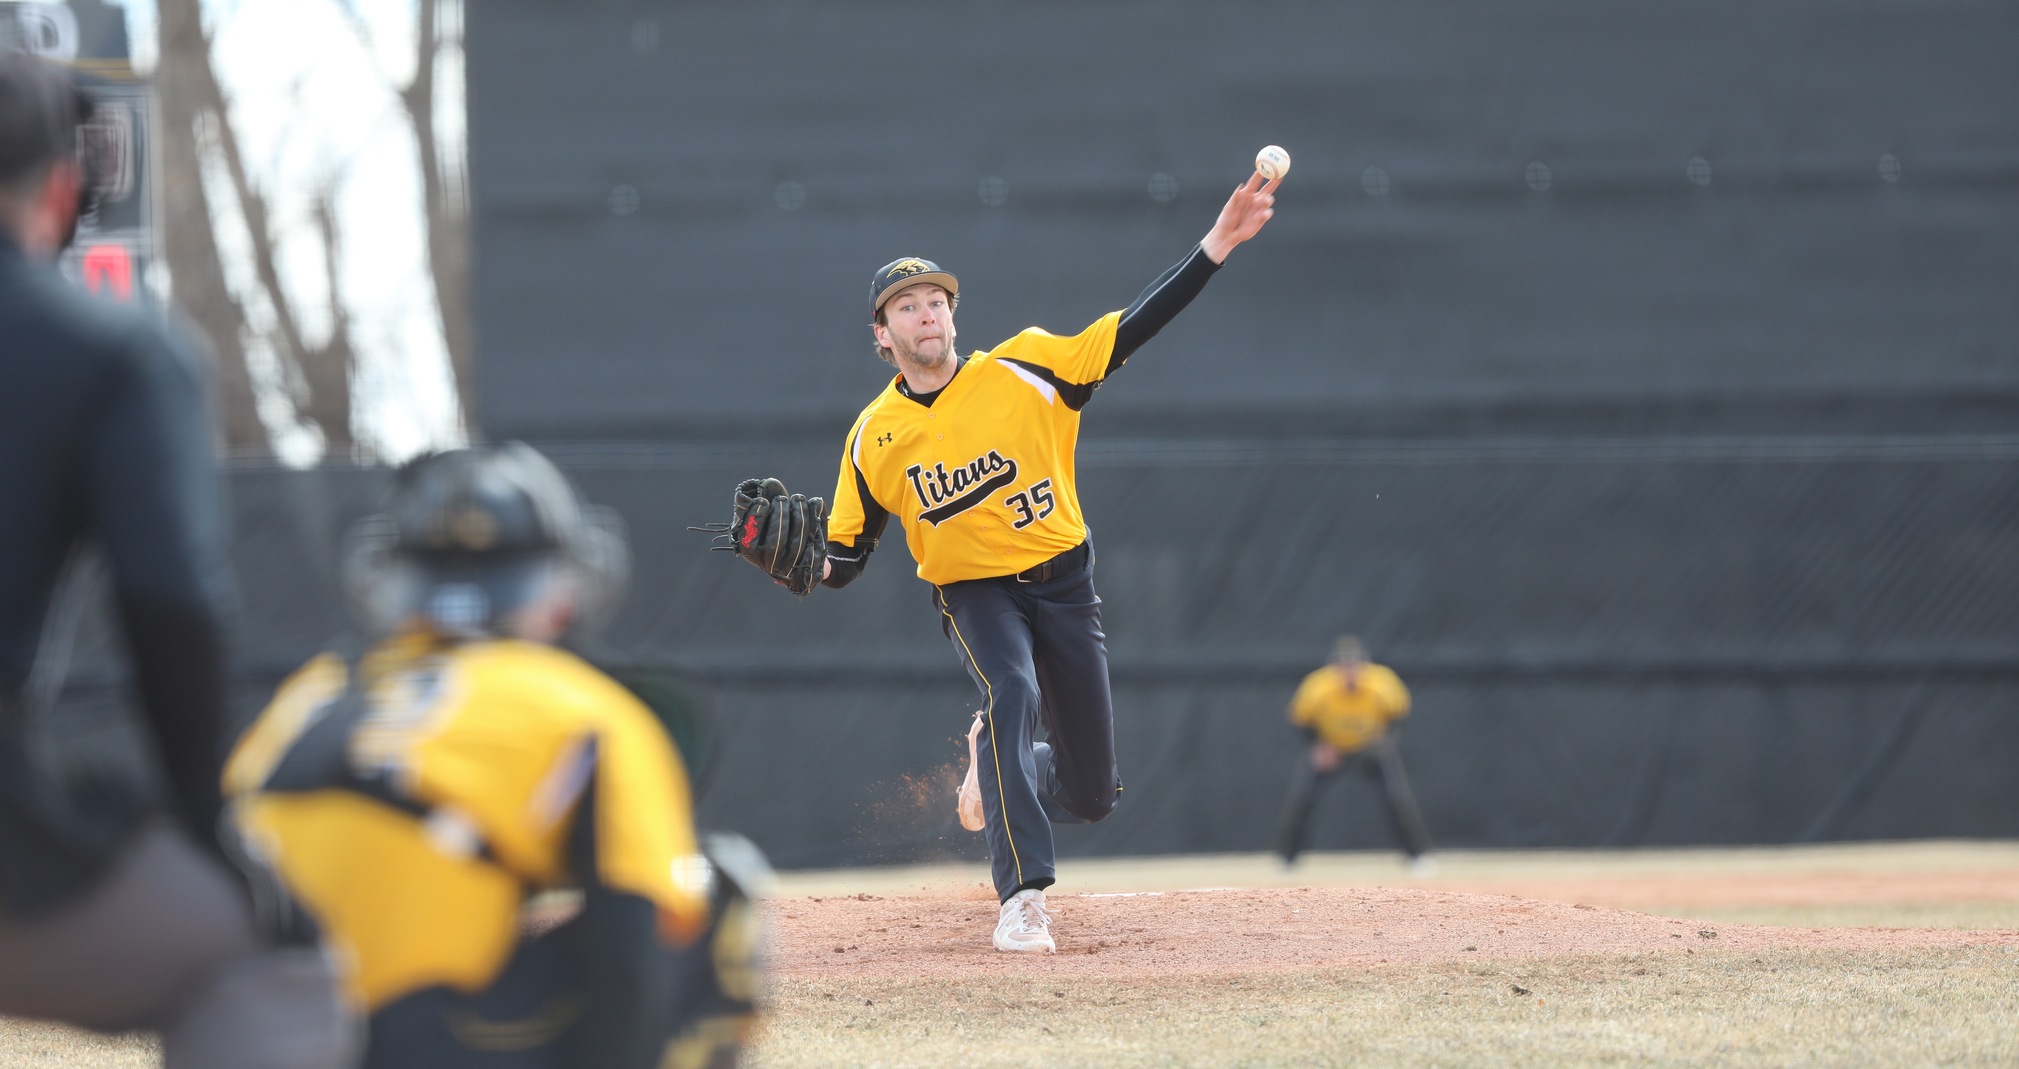 Chris Atwood threw UW-Oshkosh's 10th no-hitter and the first in the WIAC since the 2010 season.